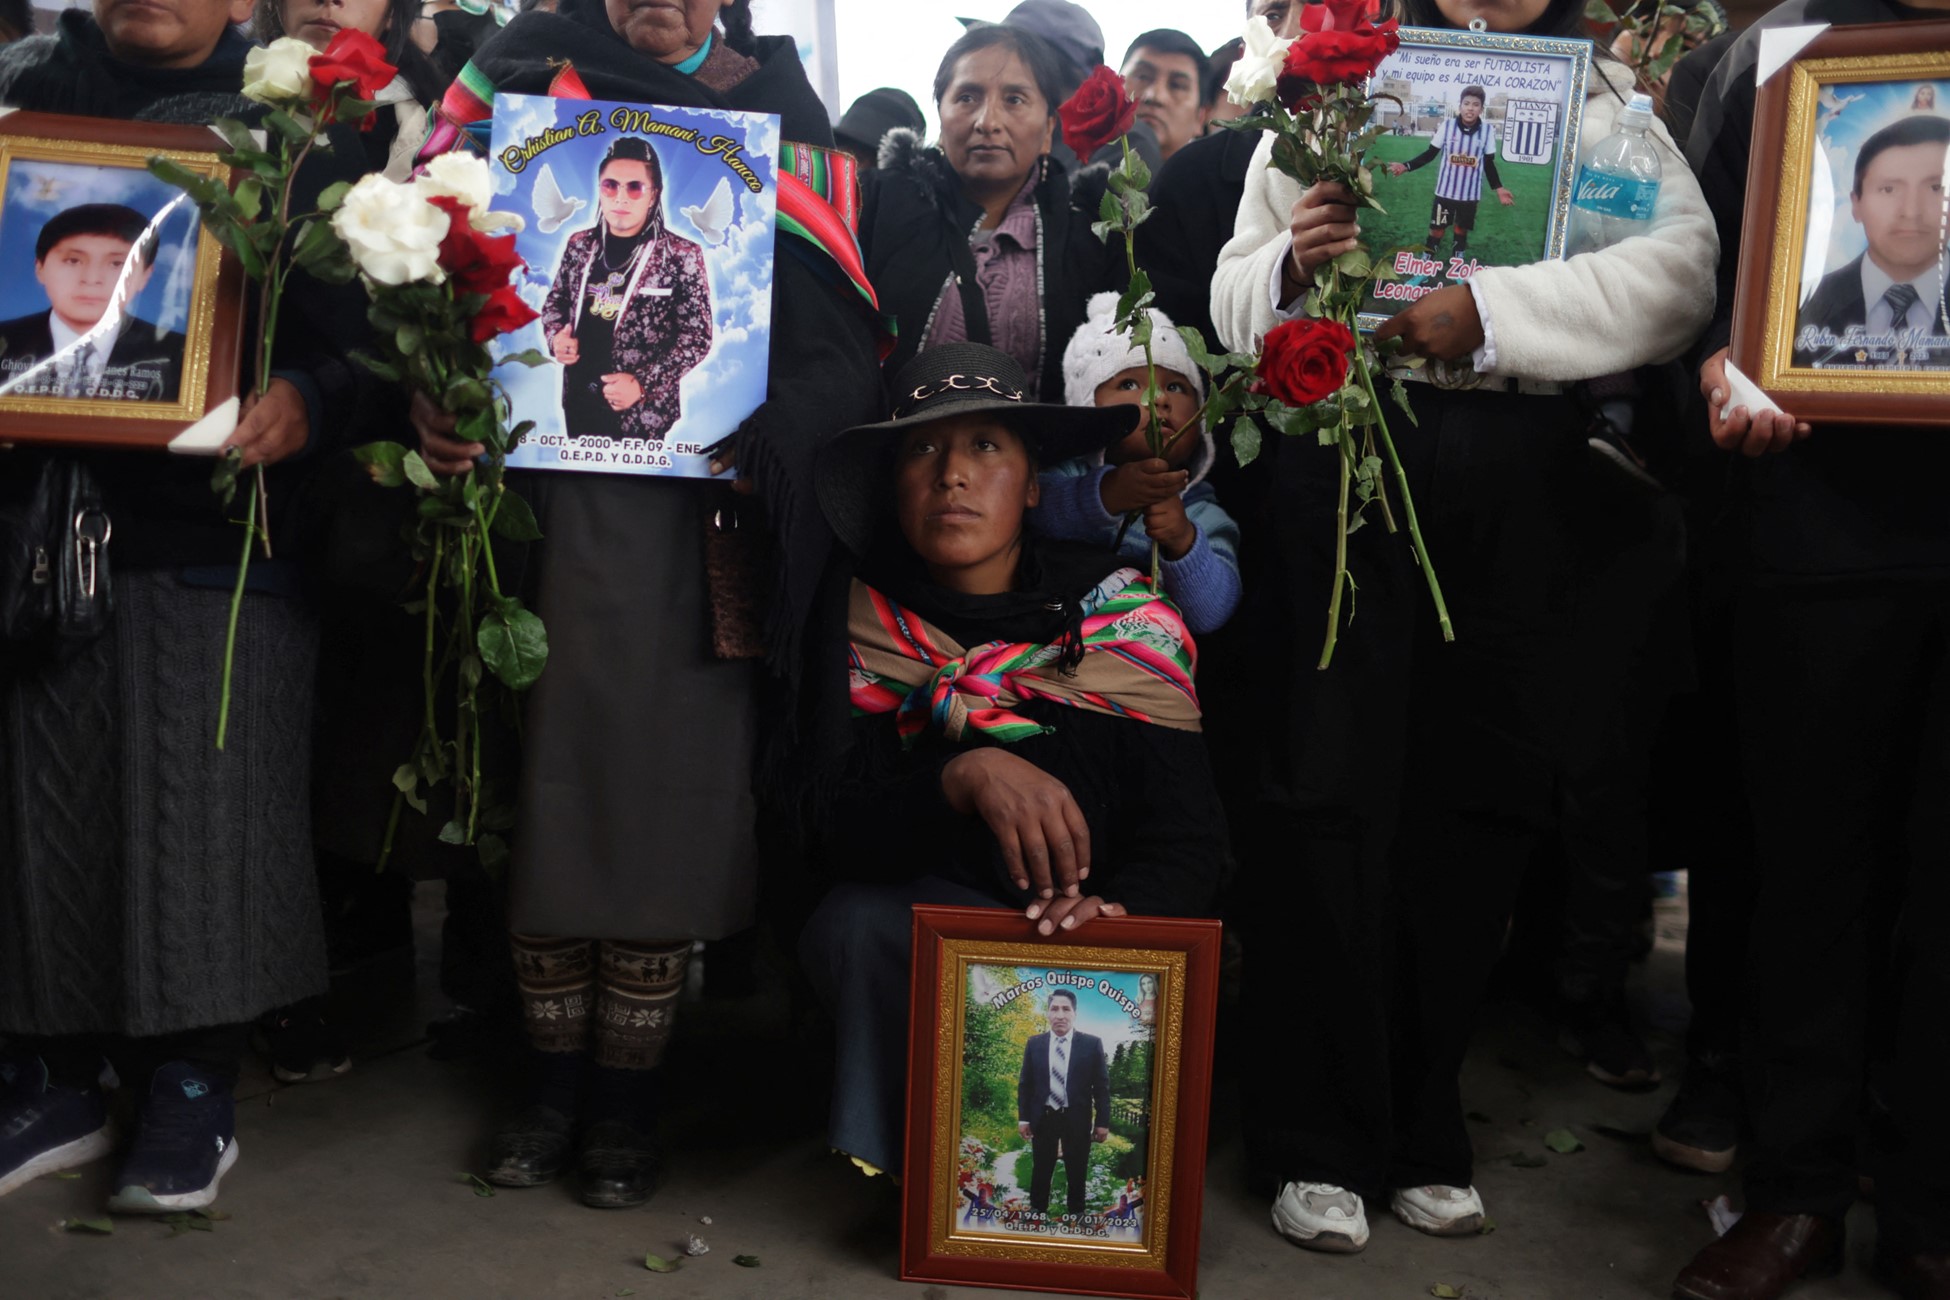 Human Rights Watch and Inter-American Commission on Human Rights Confirm What Masses Have Condemned: Peruvian State Carried Out Extrajudicial Killings and Other Abuses